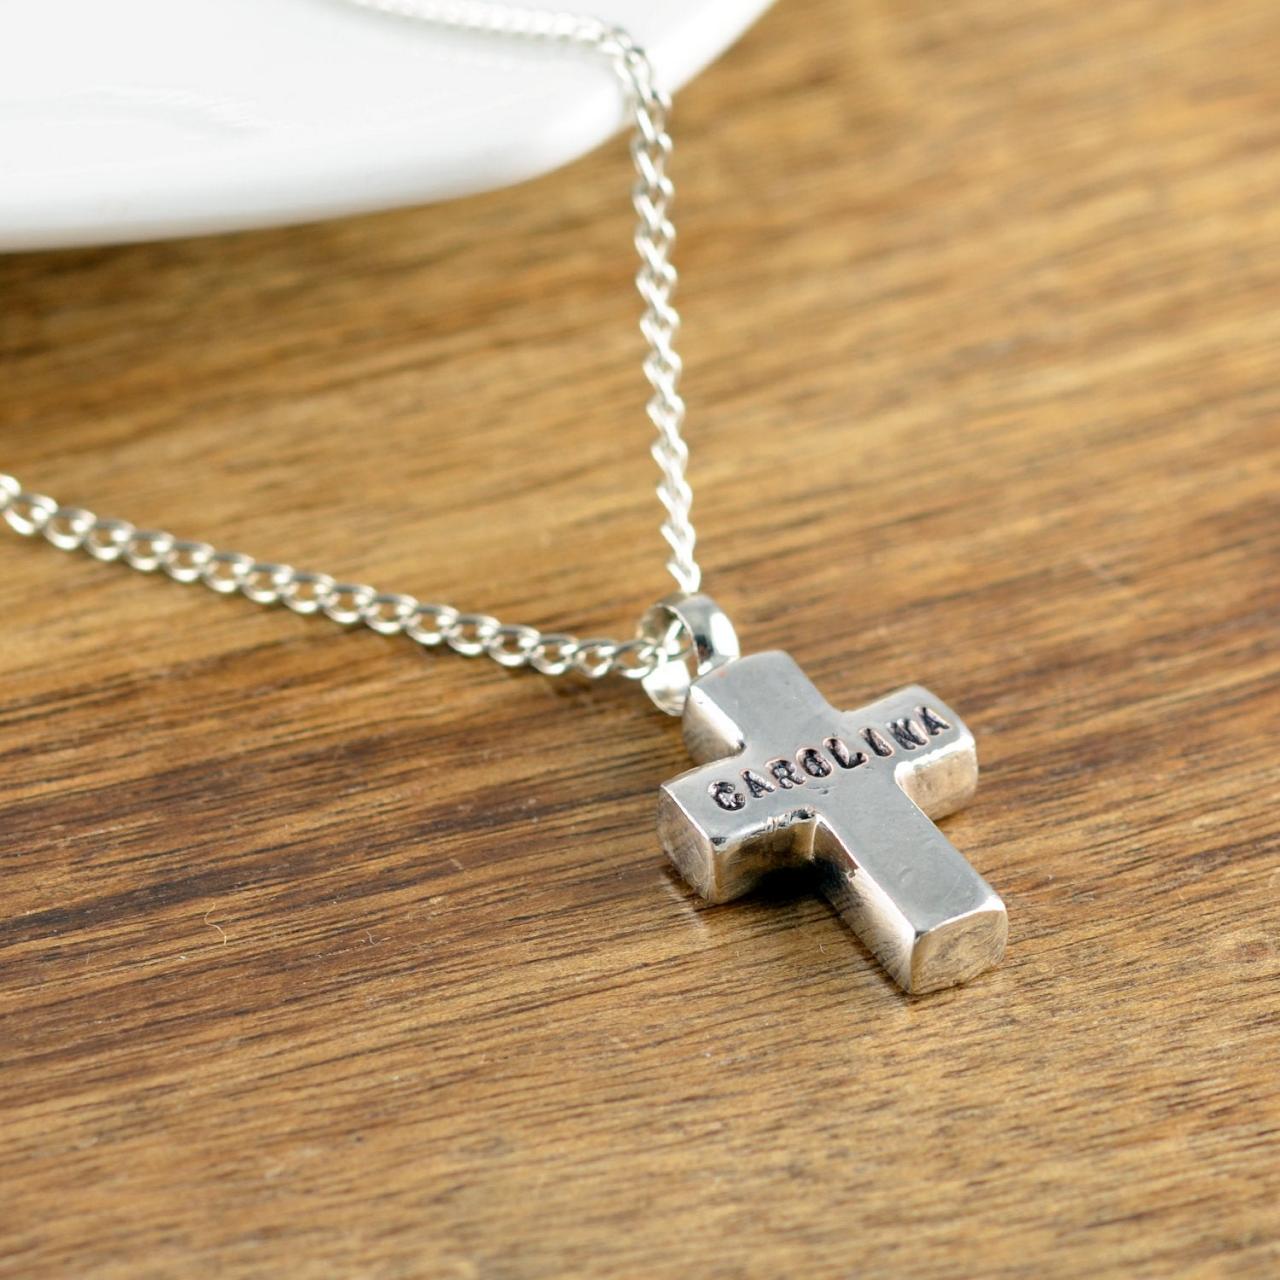 Sympathy Gift Necklace, Memorial Necklace, Remembrance Necklace, Cremation Necklace, Personalized Cross Necklace, Gift For Him